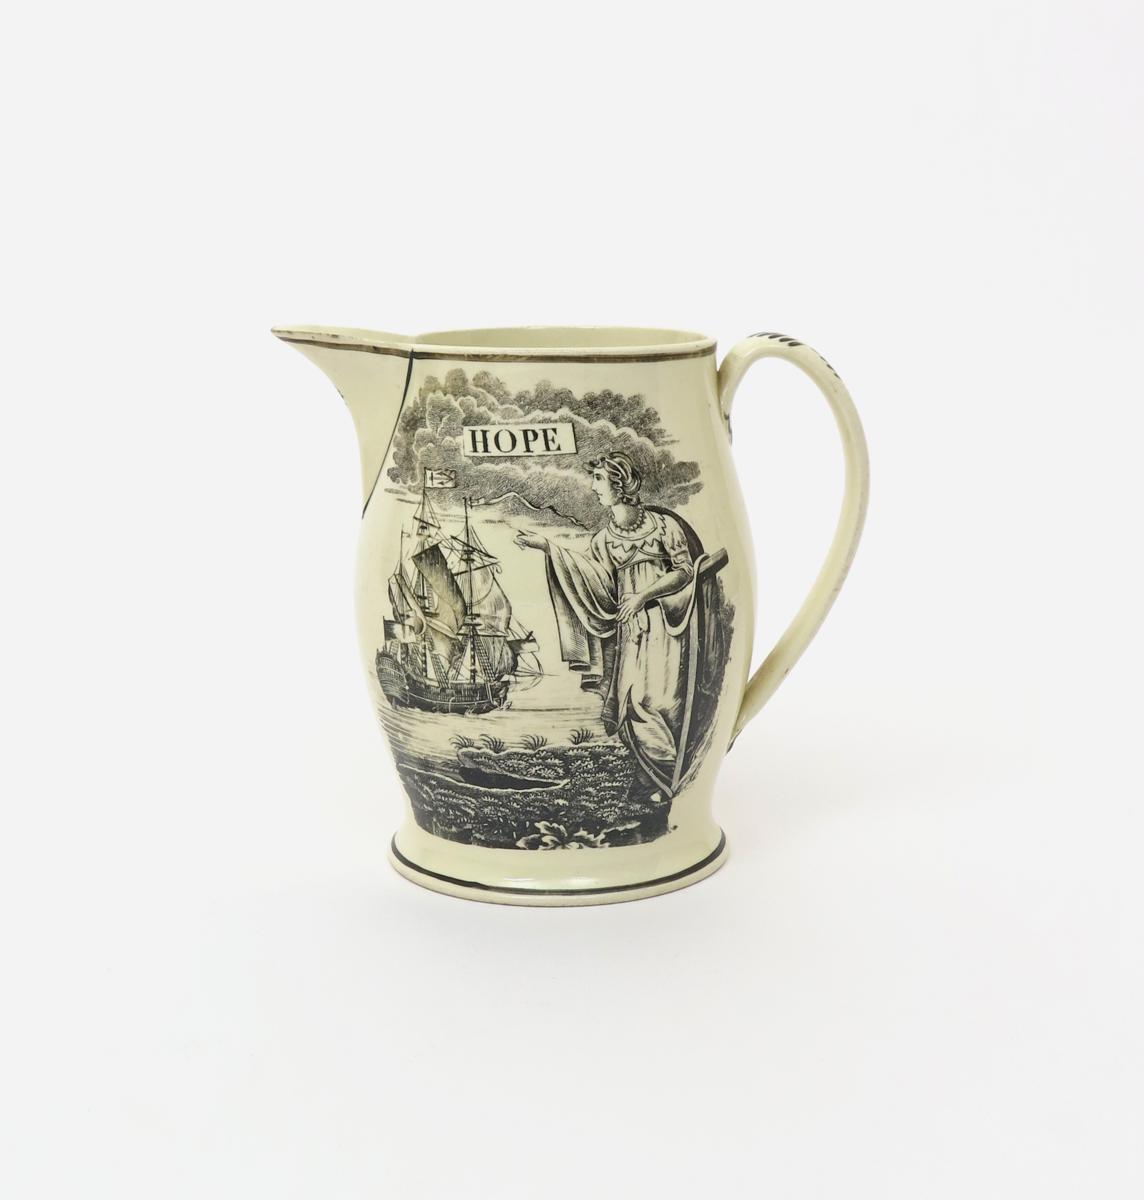 A creamware jug of maritime interest  c.1810, printed in black with a figure of Hope looking out